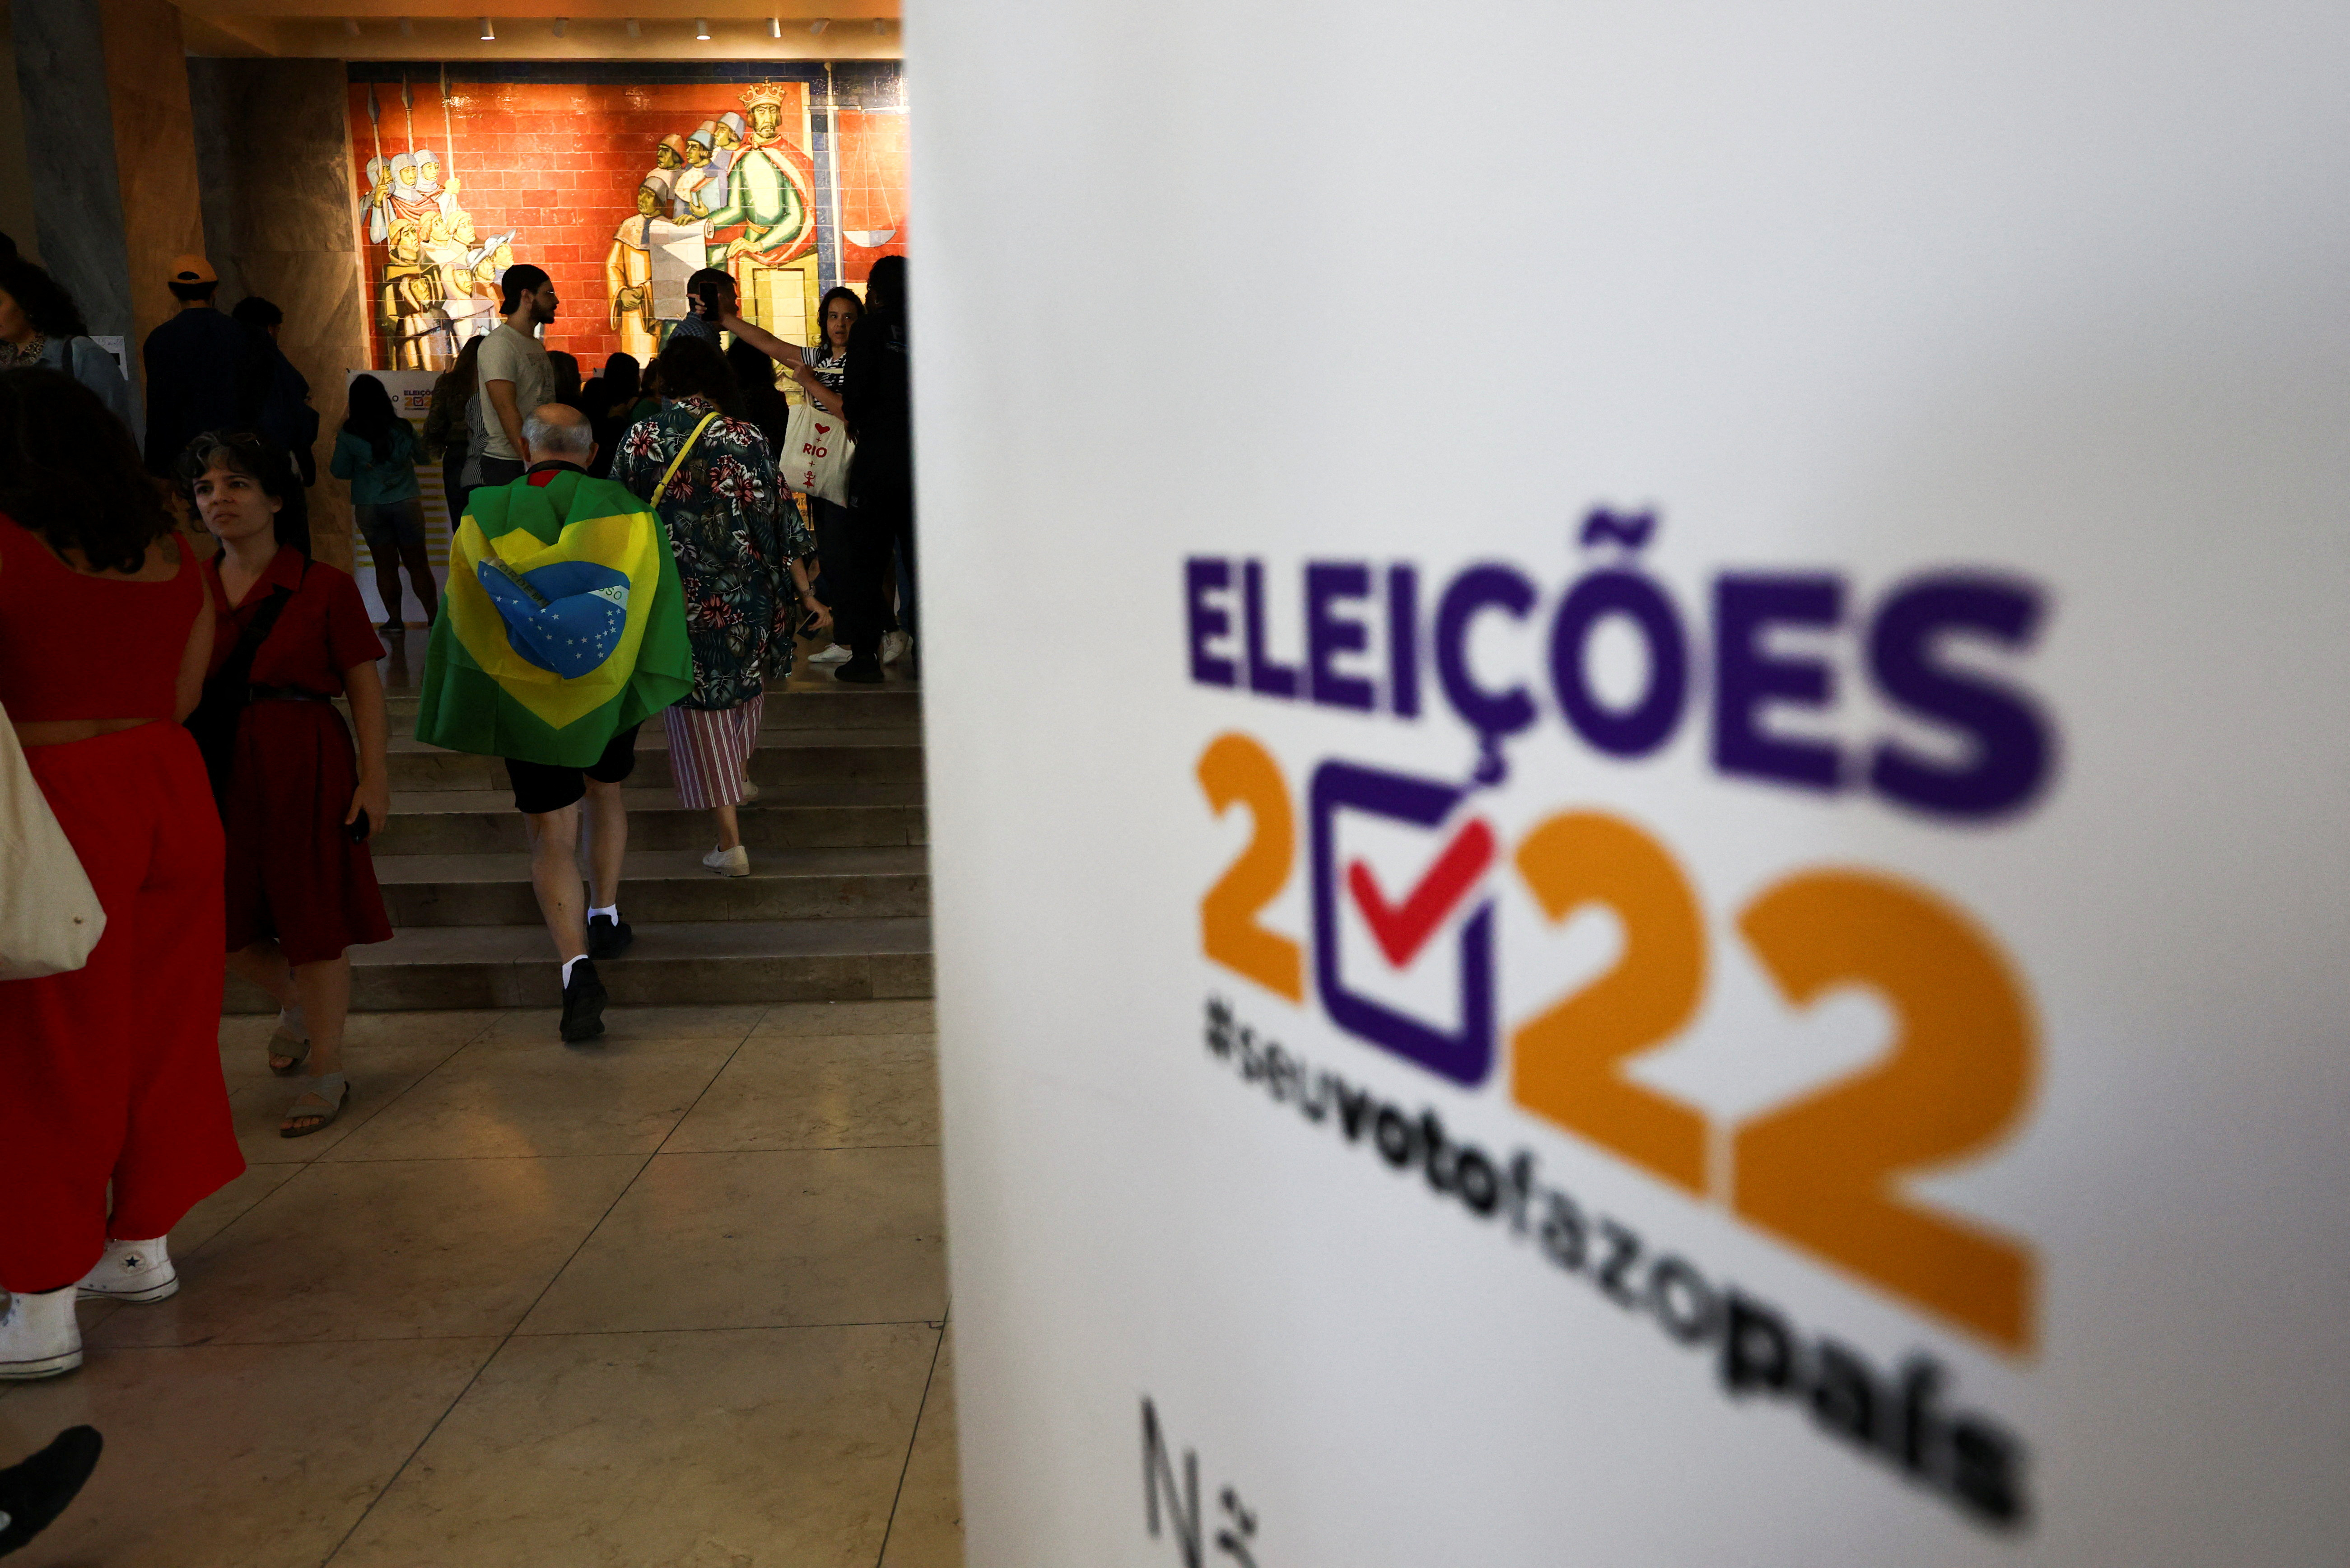 Citizens of Brazil wait in line to cast their vote in their country's election, in Lisbon, Portugal, October 2, 2022. REUTERS/Pedro Nunes